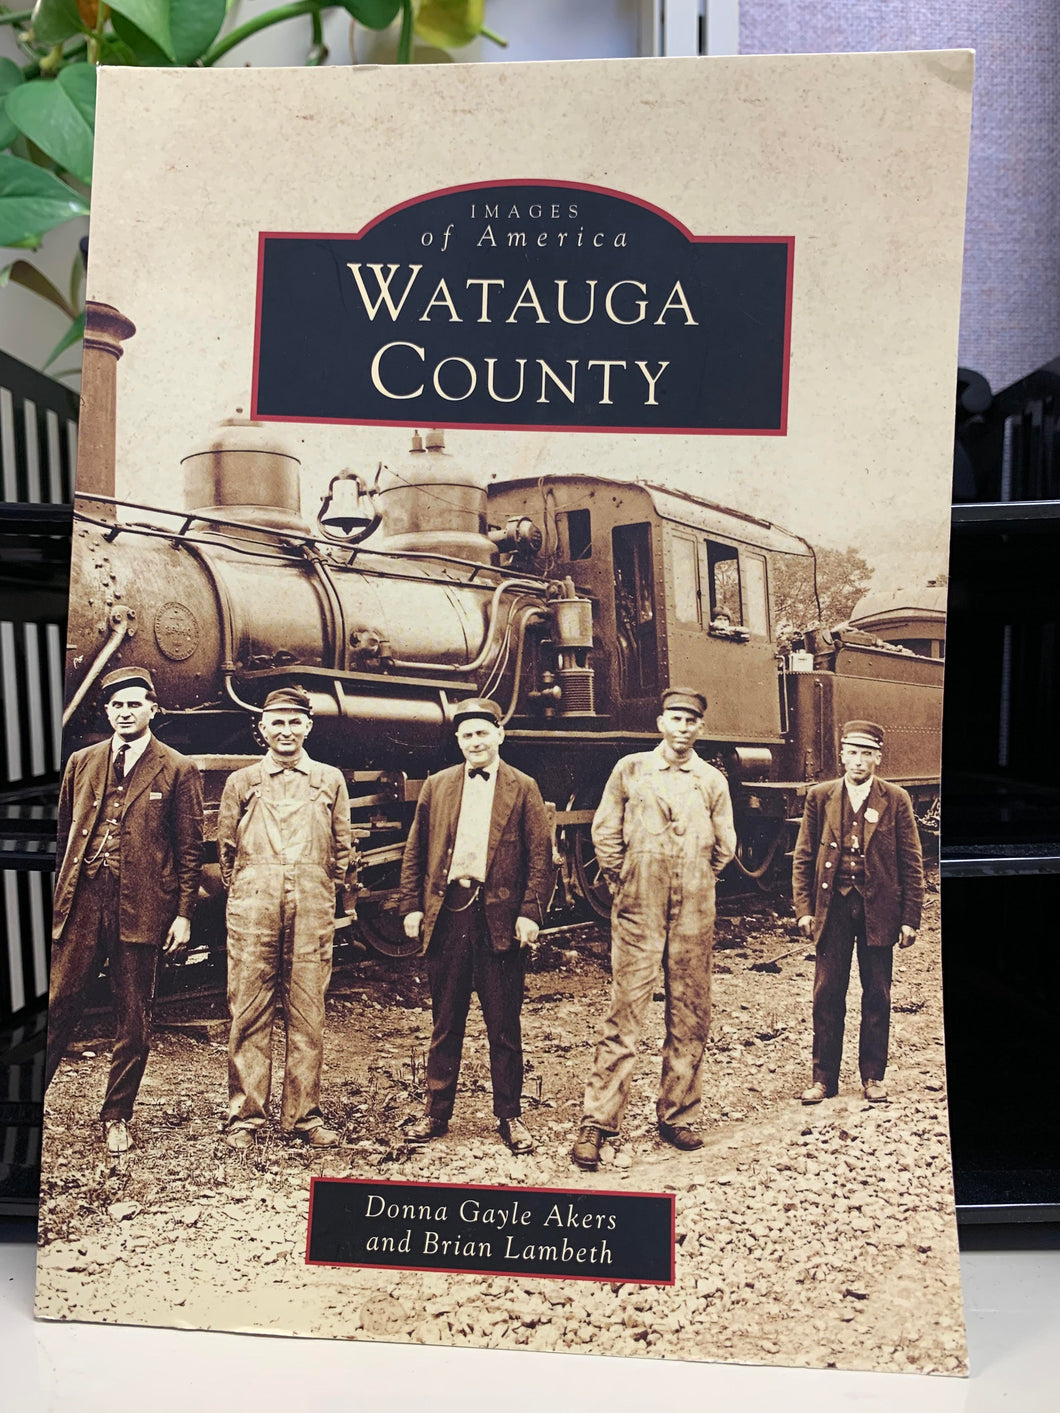 Images of America: Watauga County by Donna Gayle Akers and Brian Lambeth